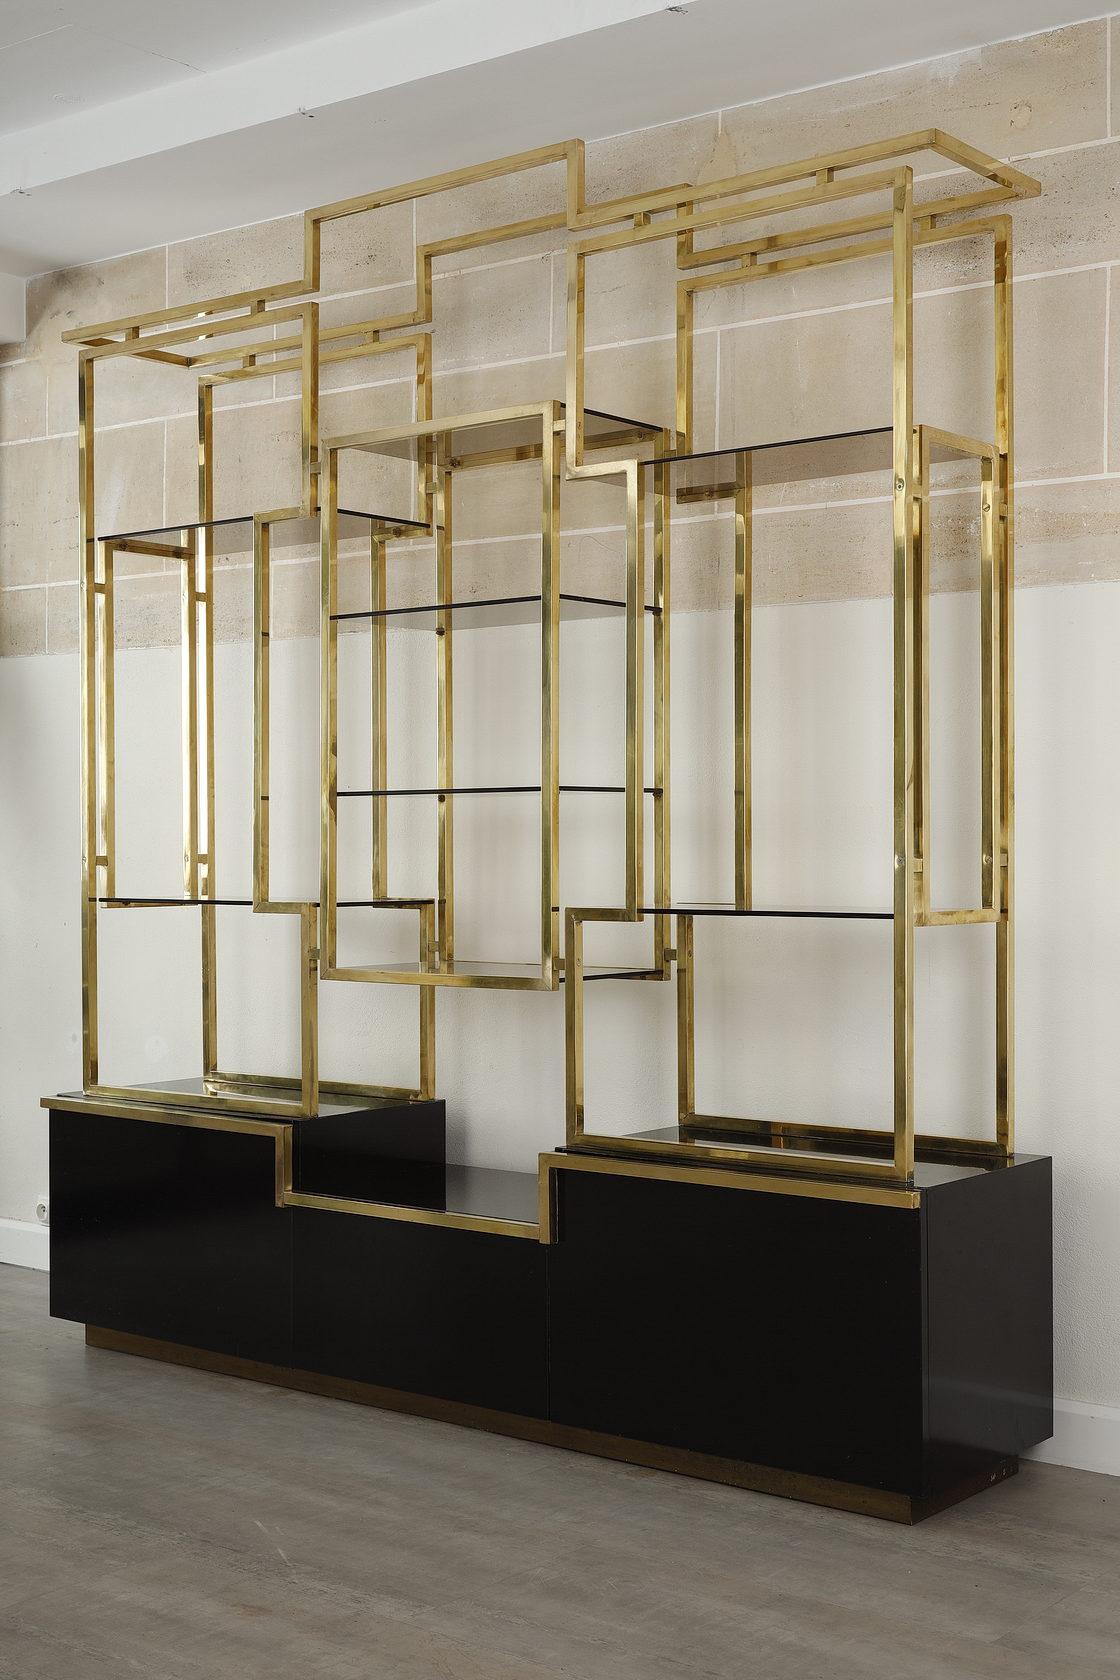 Large design bookcase by Kim Moltzer made in the 1970s. The bookcase is rectangular in shape and uses the geometric forms favoured by the designer. It has eight smoked glass shelves in a large gilded brass structure. The black lacquered wooden base